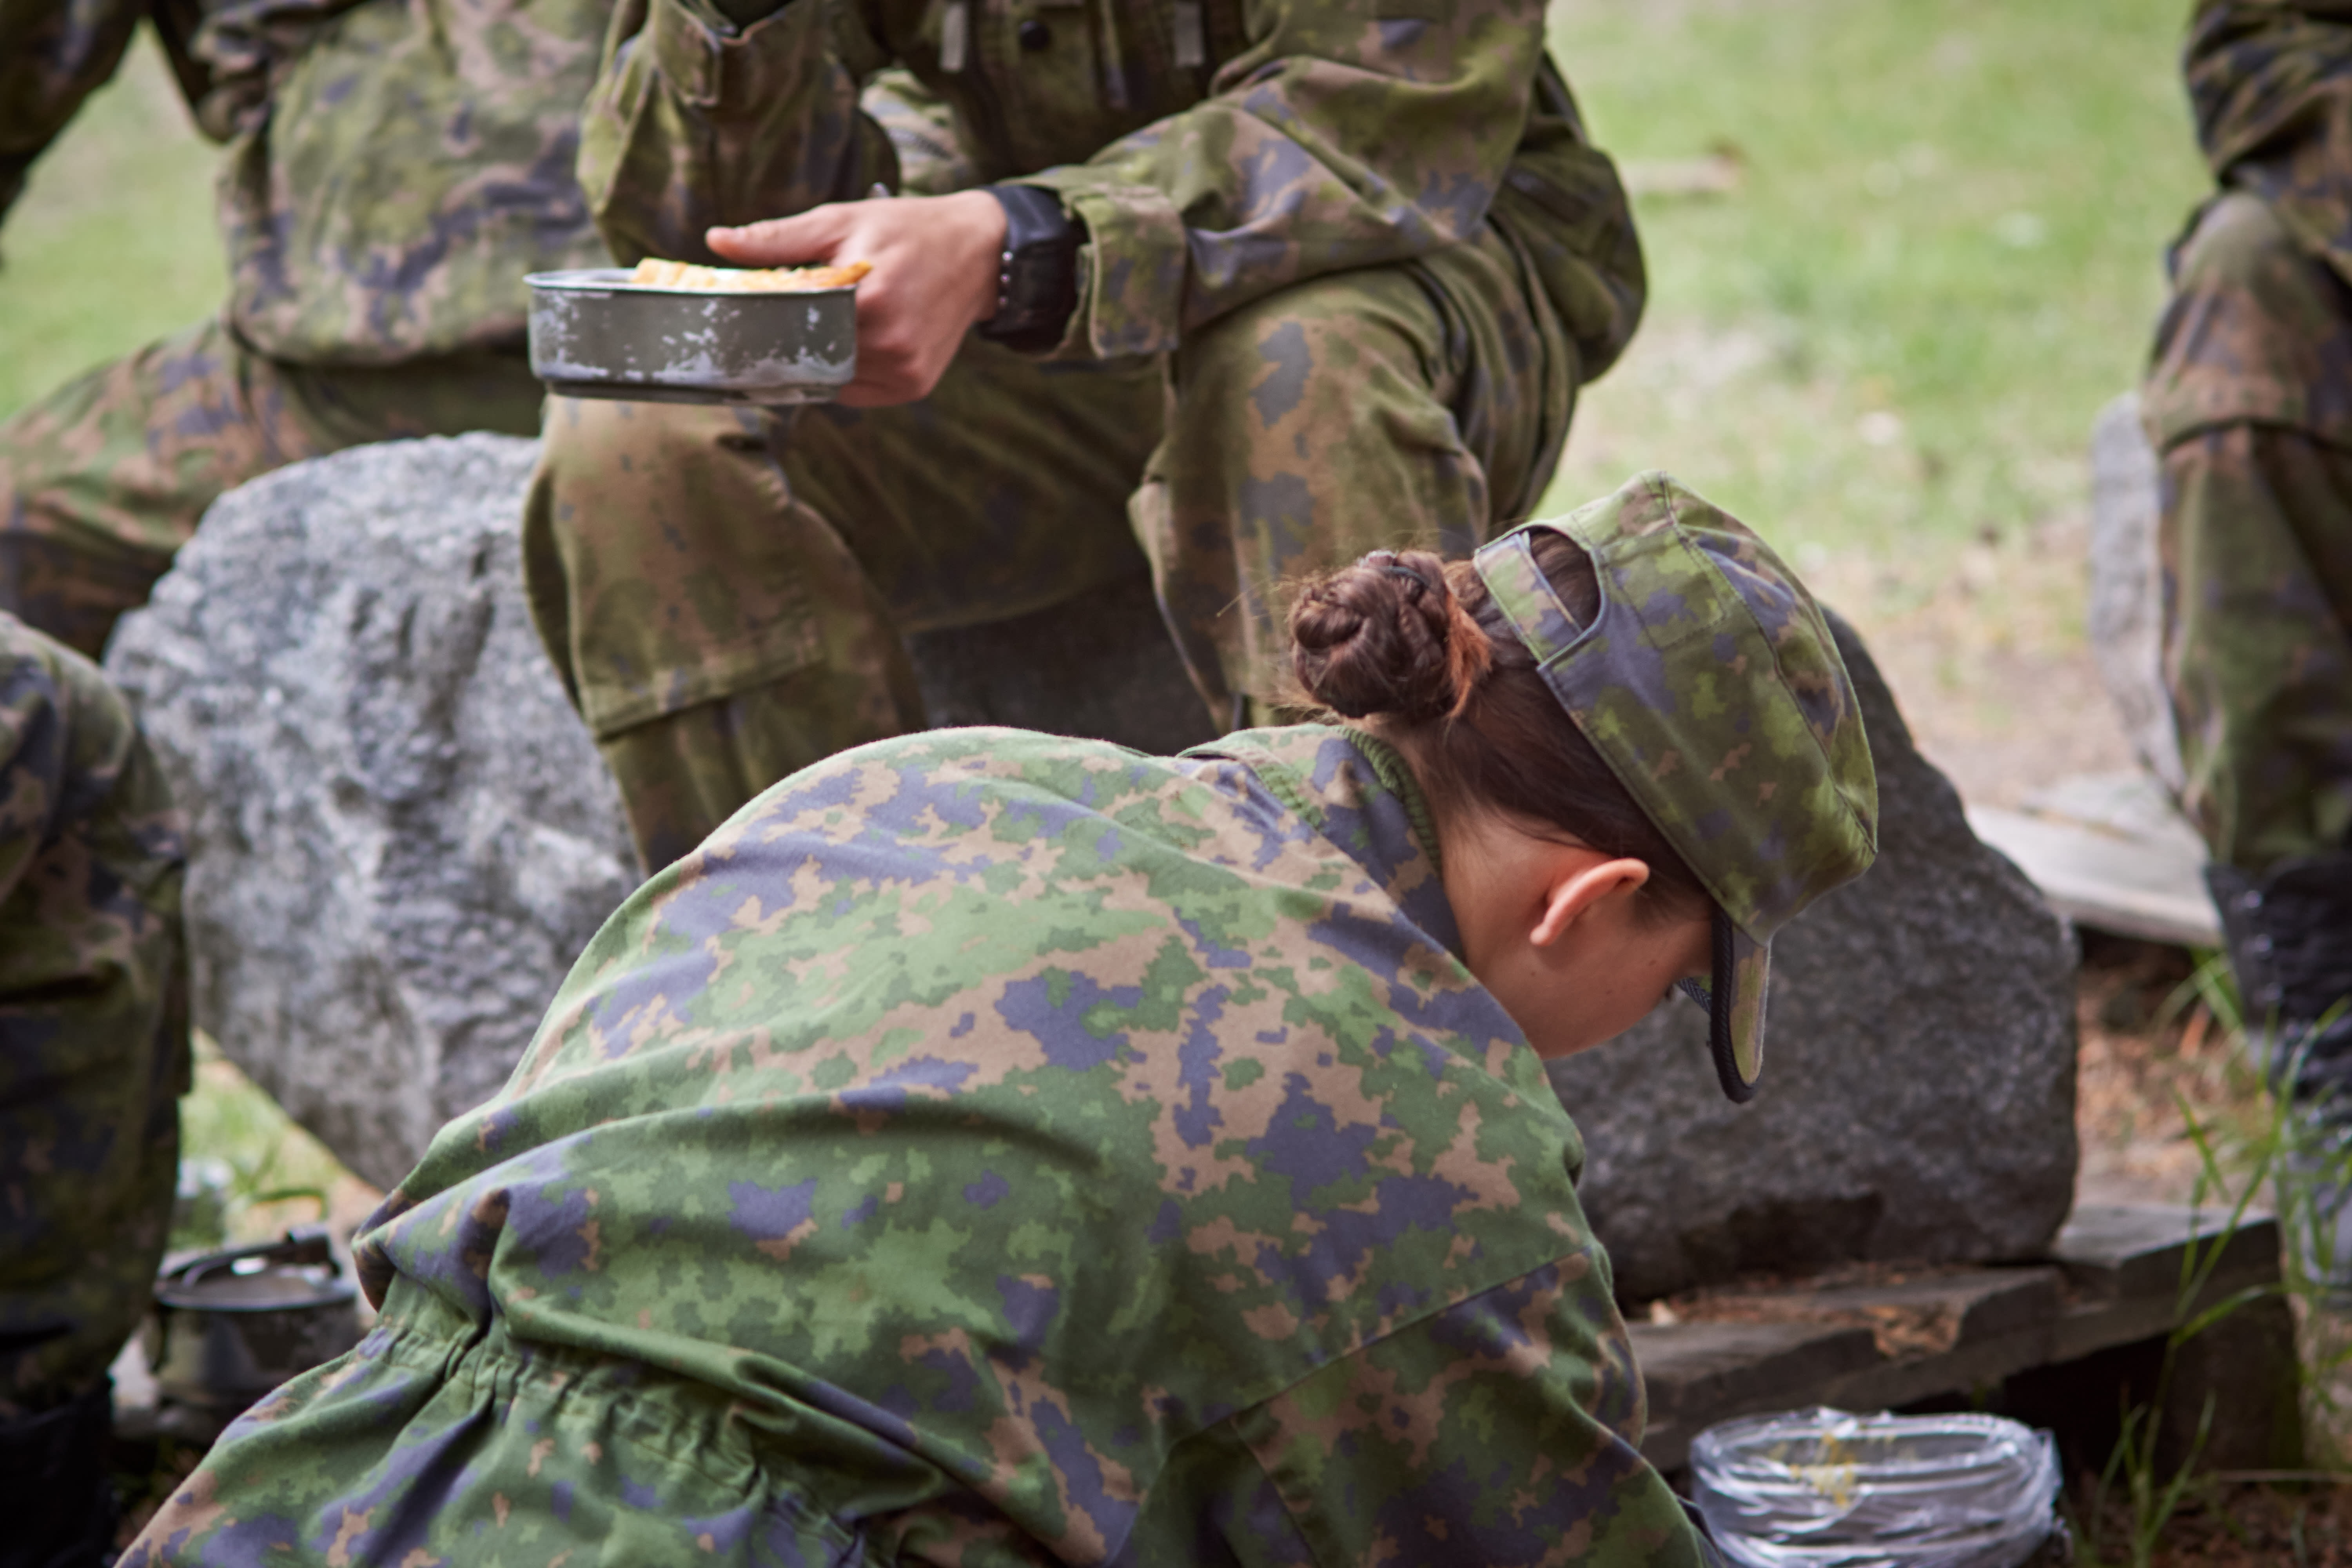 Finnish women may be called up for military service in the future